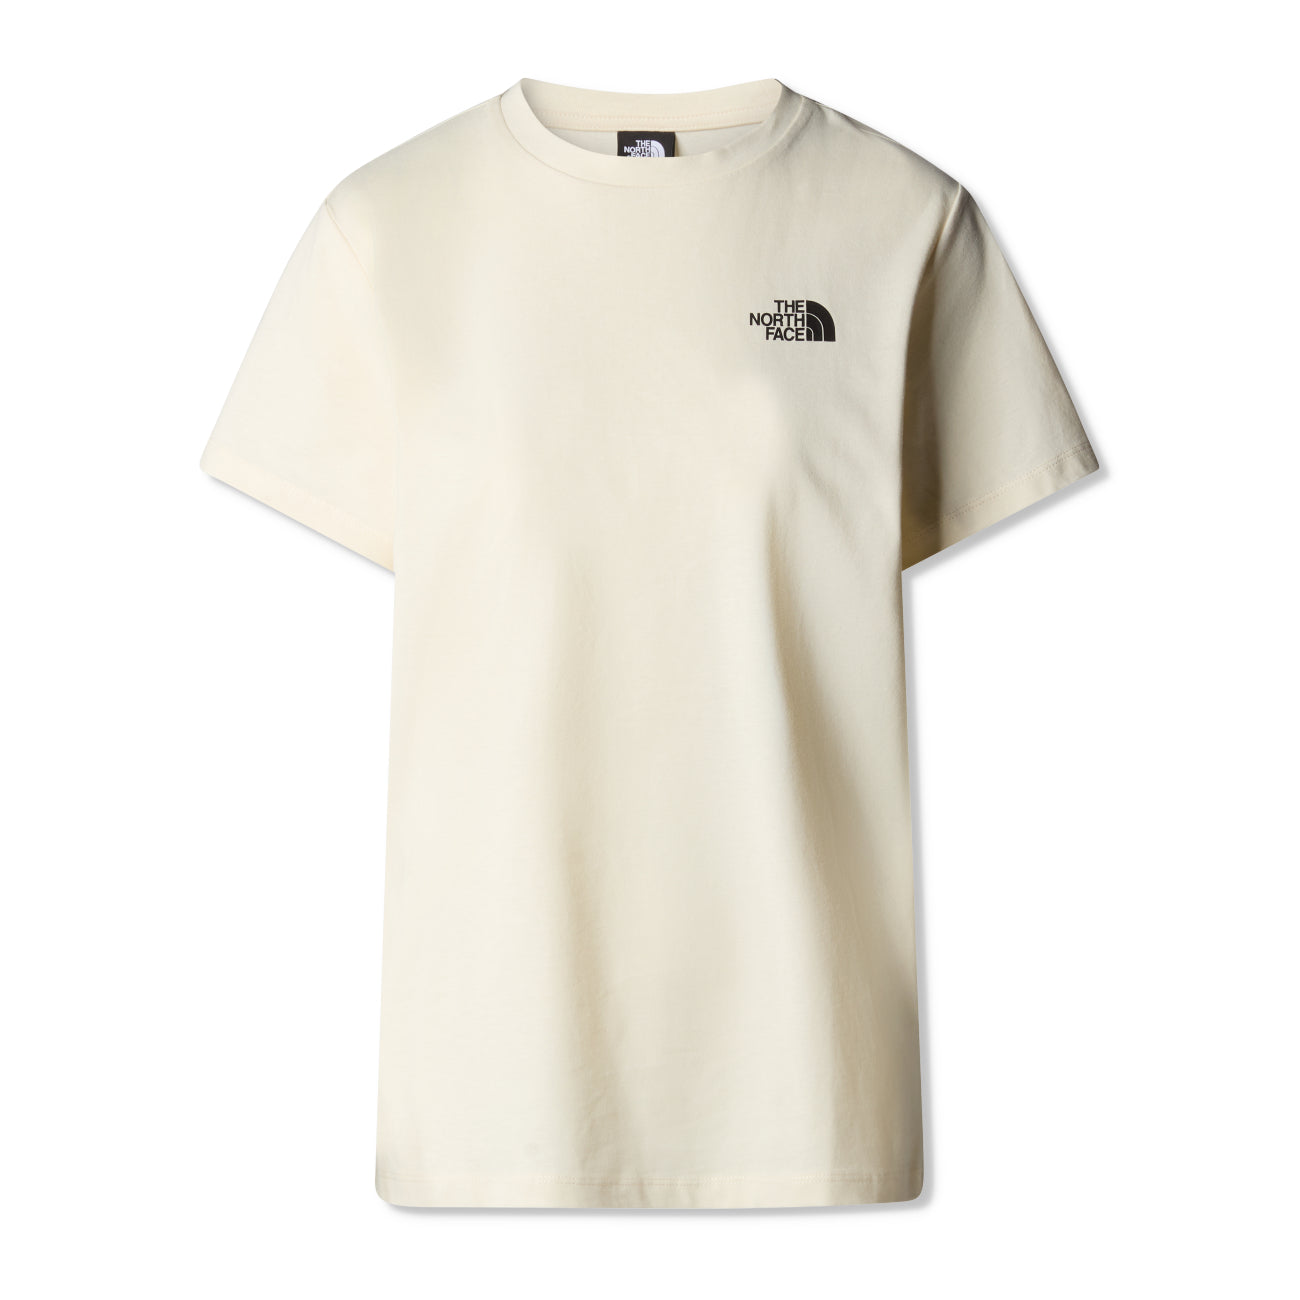 W S/S Relaxed Redbox Tee